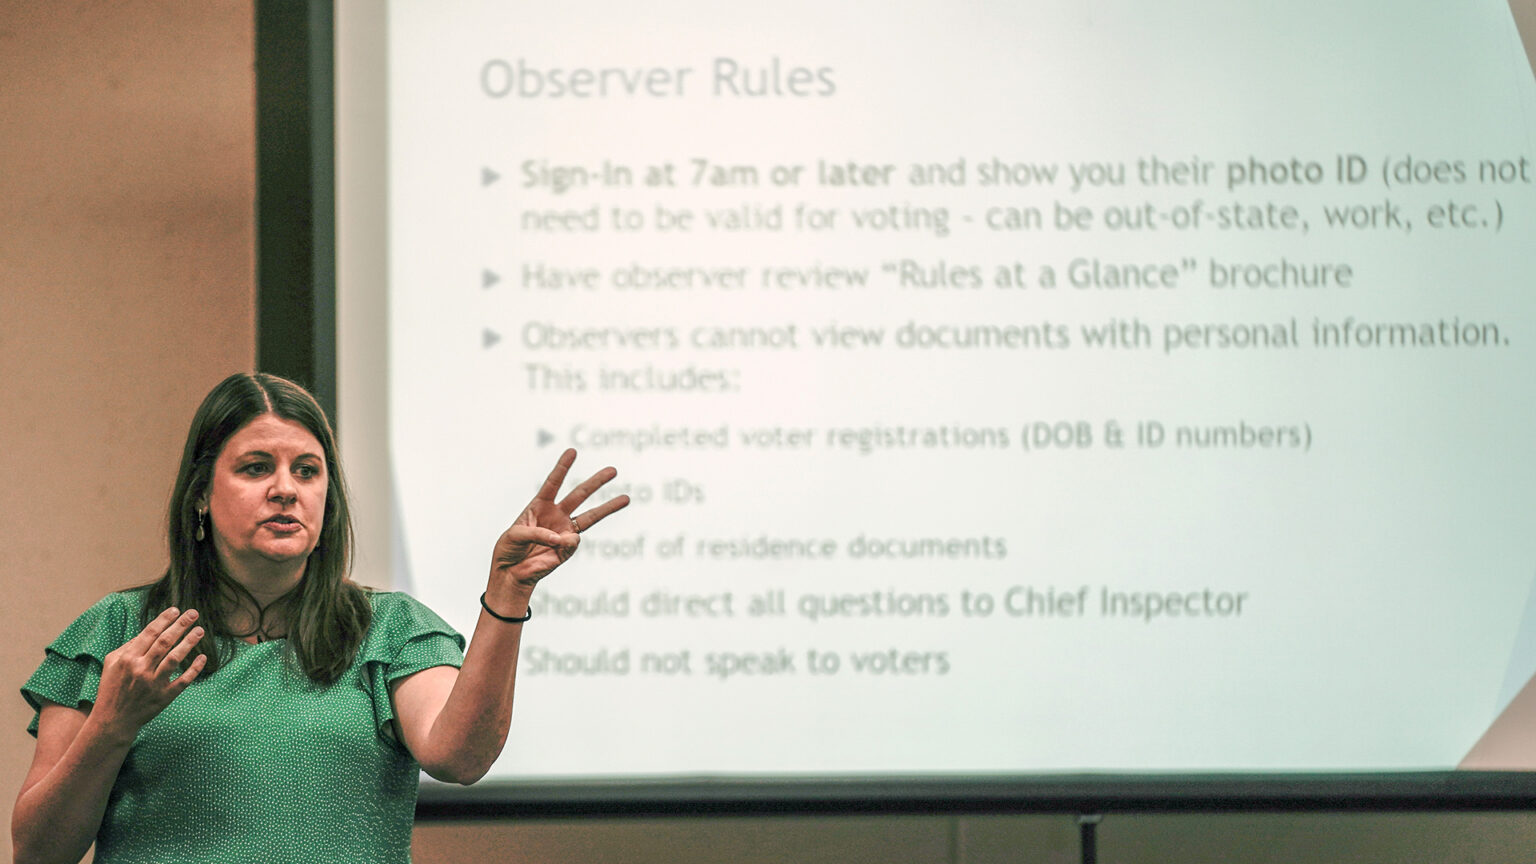 Claire Woodall-Vogg stands and gestures with her hands while standing in front of a projection screen showing a list of Observer Rules.